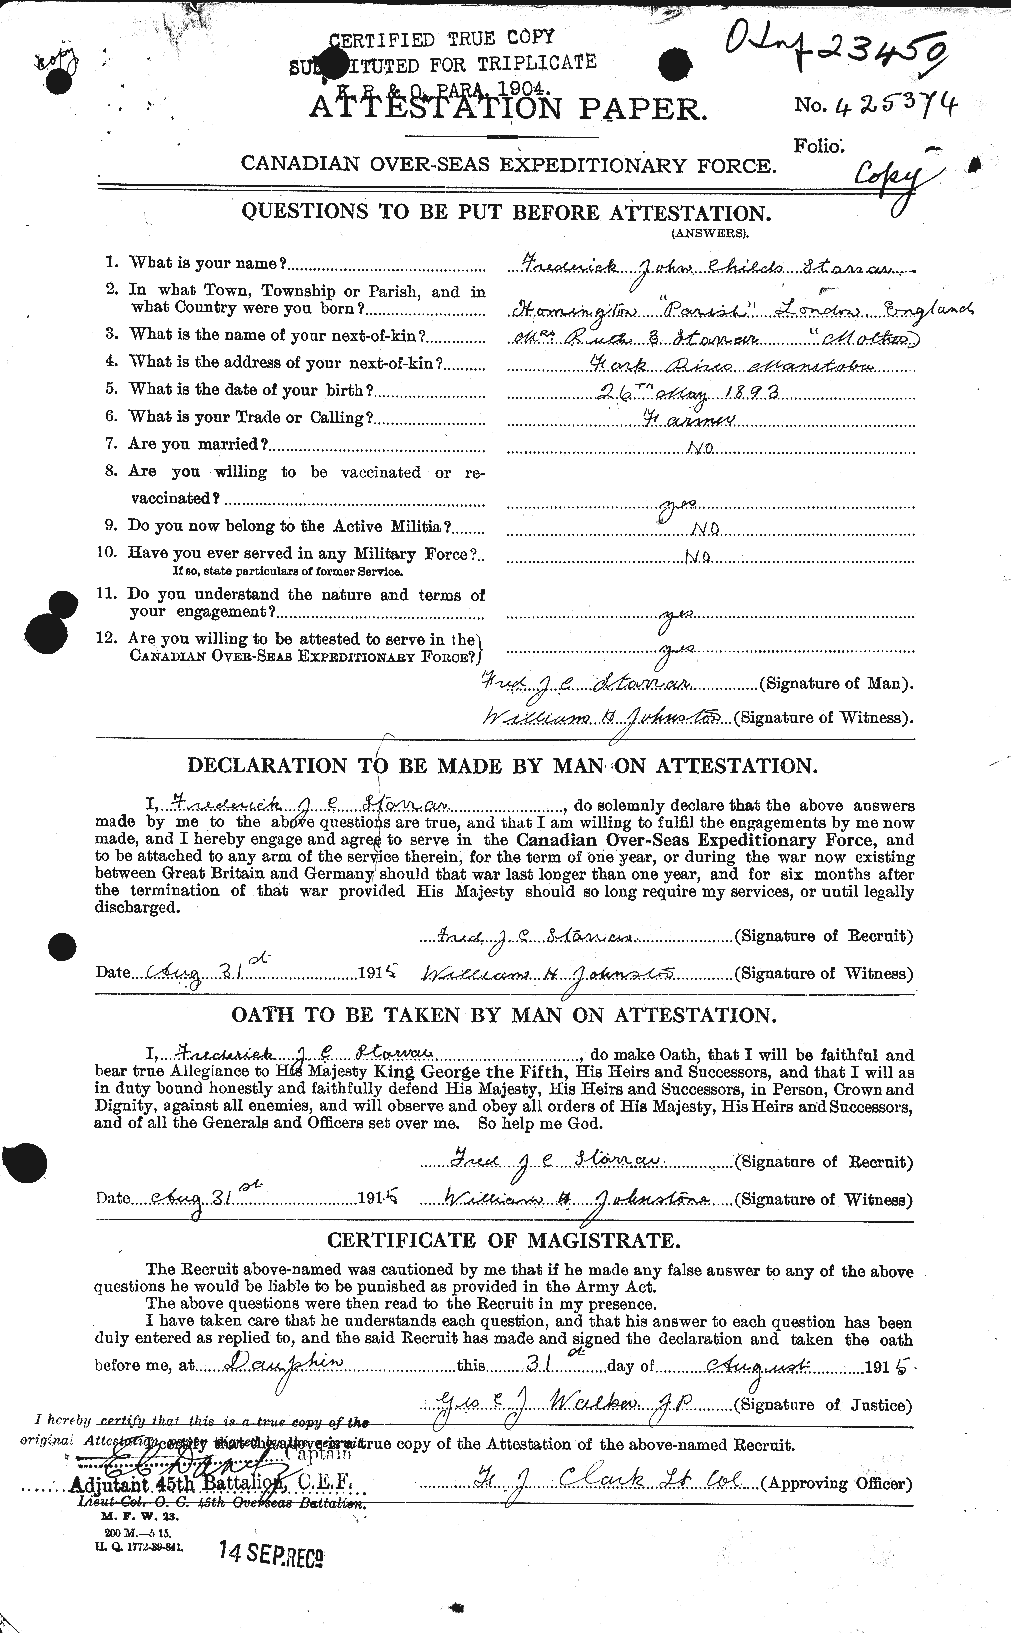 Personnel Records of the First World War - CEF 116420a